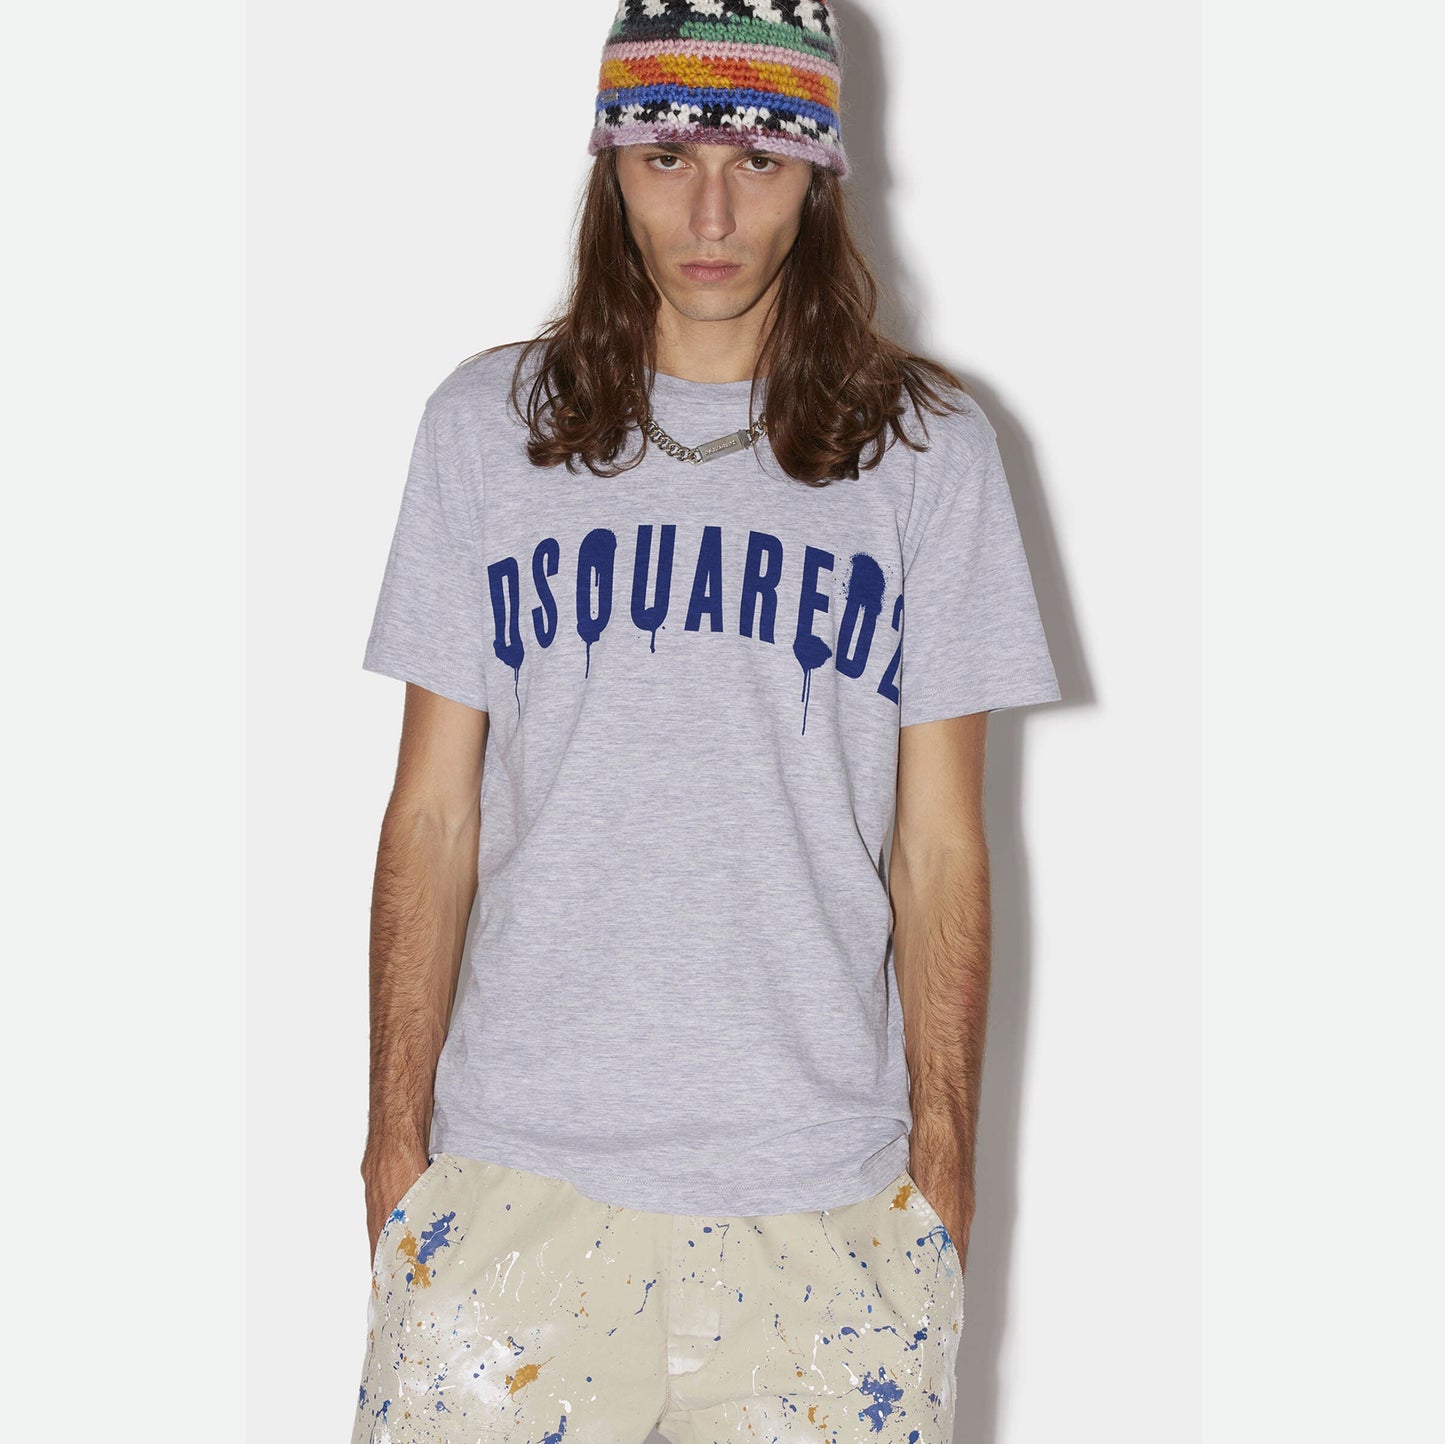 The classic marl tee is reworked in DSQUARED2 style for this summer. Features a striking paint drip logo on a plain-dye base. 